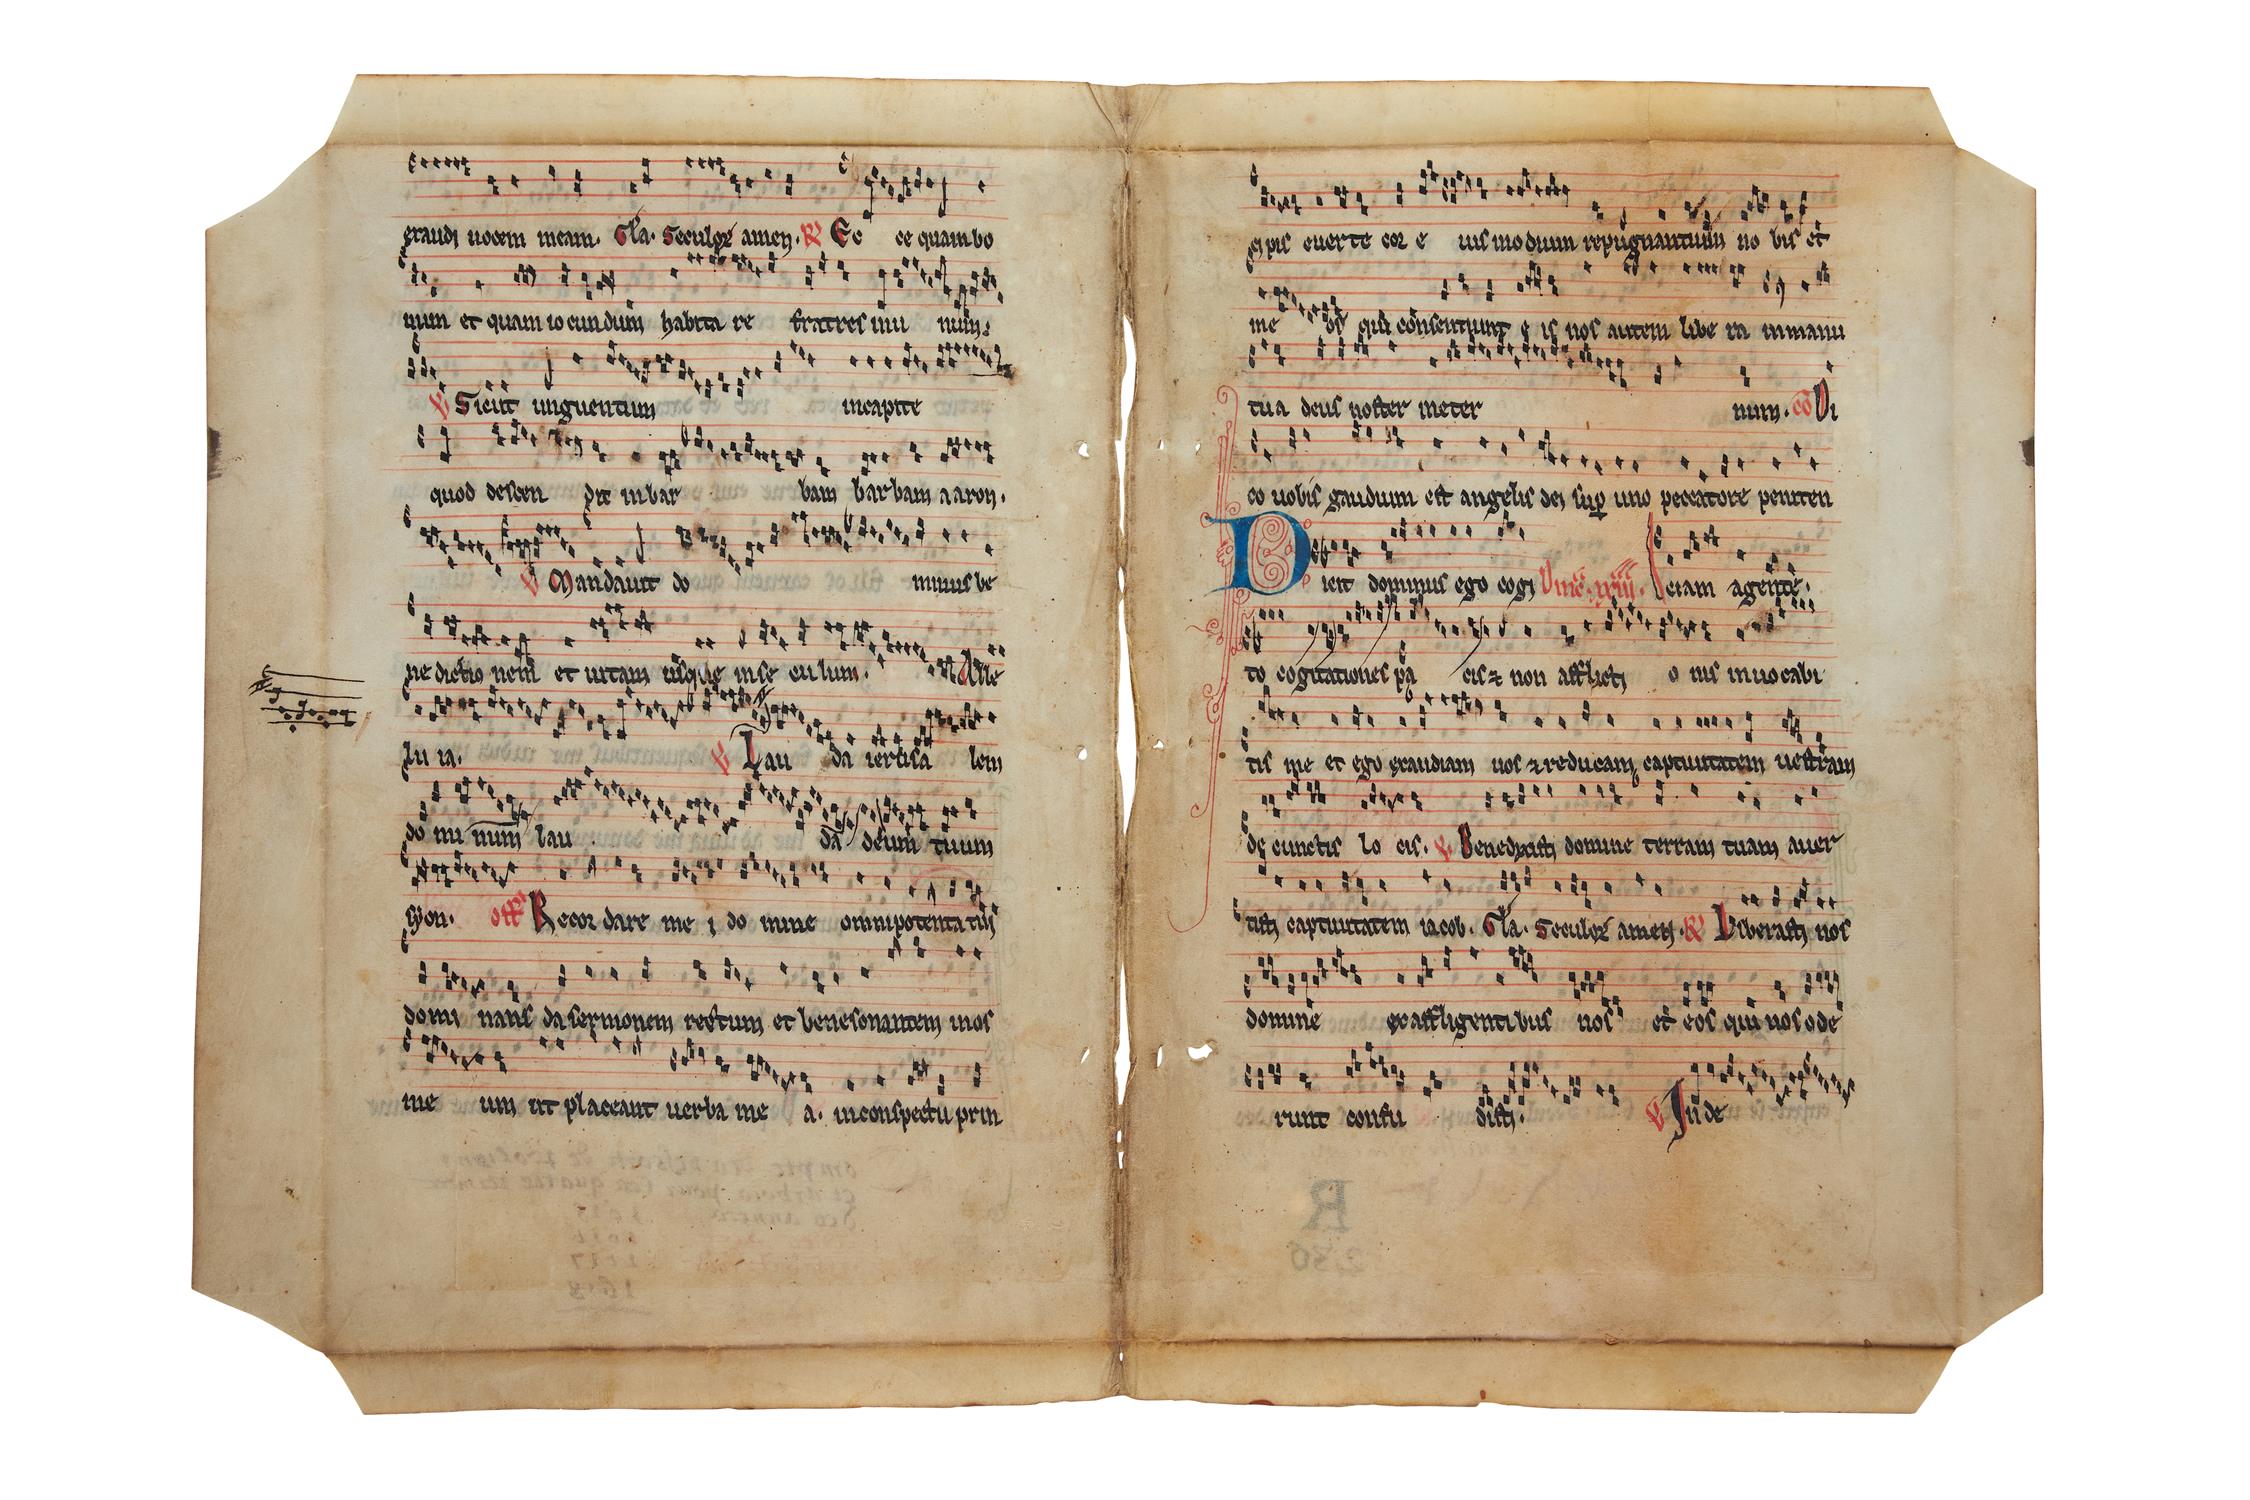 Bifolium from an early choirbook, in Latin, decorated manuscript on parchment